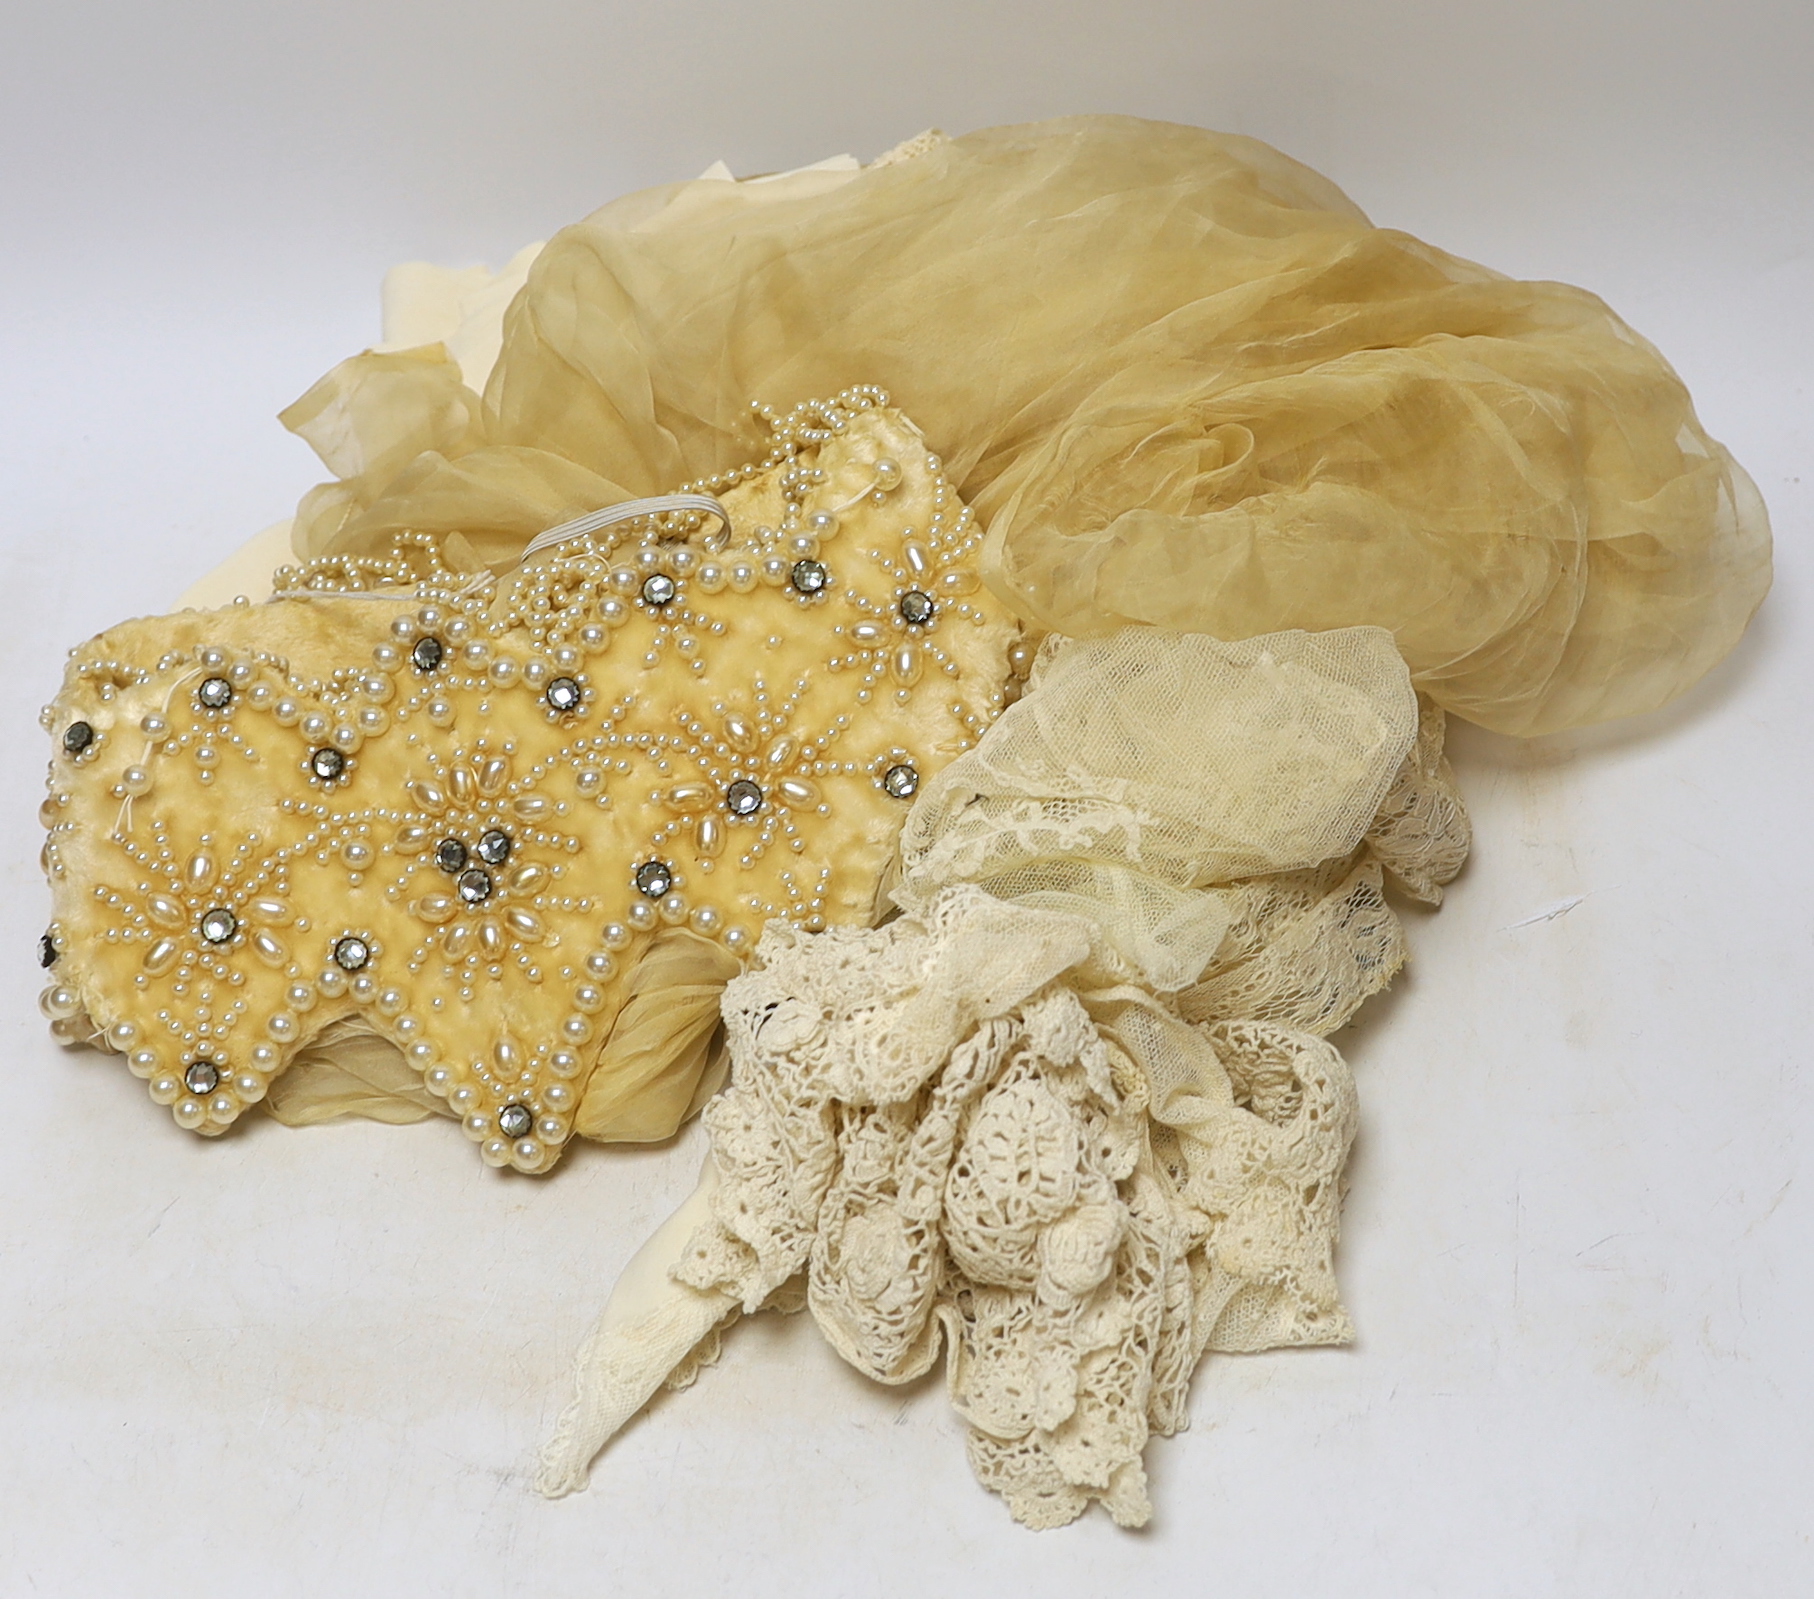 An Edwardian fine machine lace stole and various handmade and machine lace collars and trimmings, with a wedding veil from 1920's and pearl and diamonté head-dress